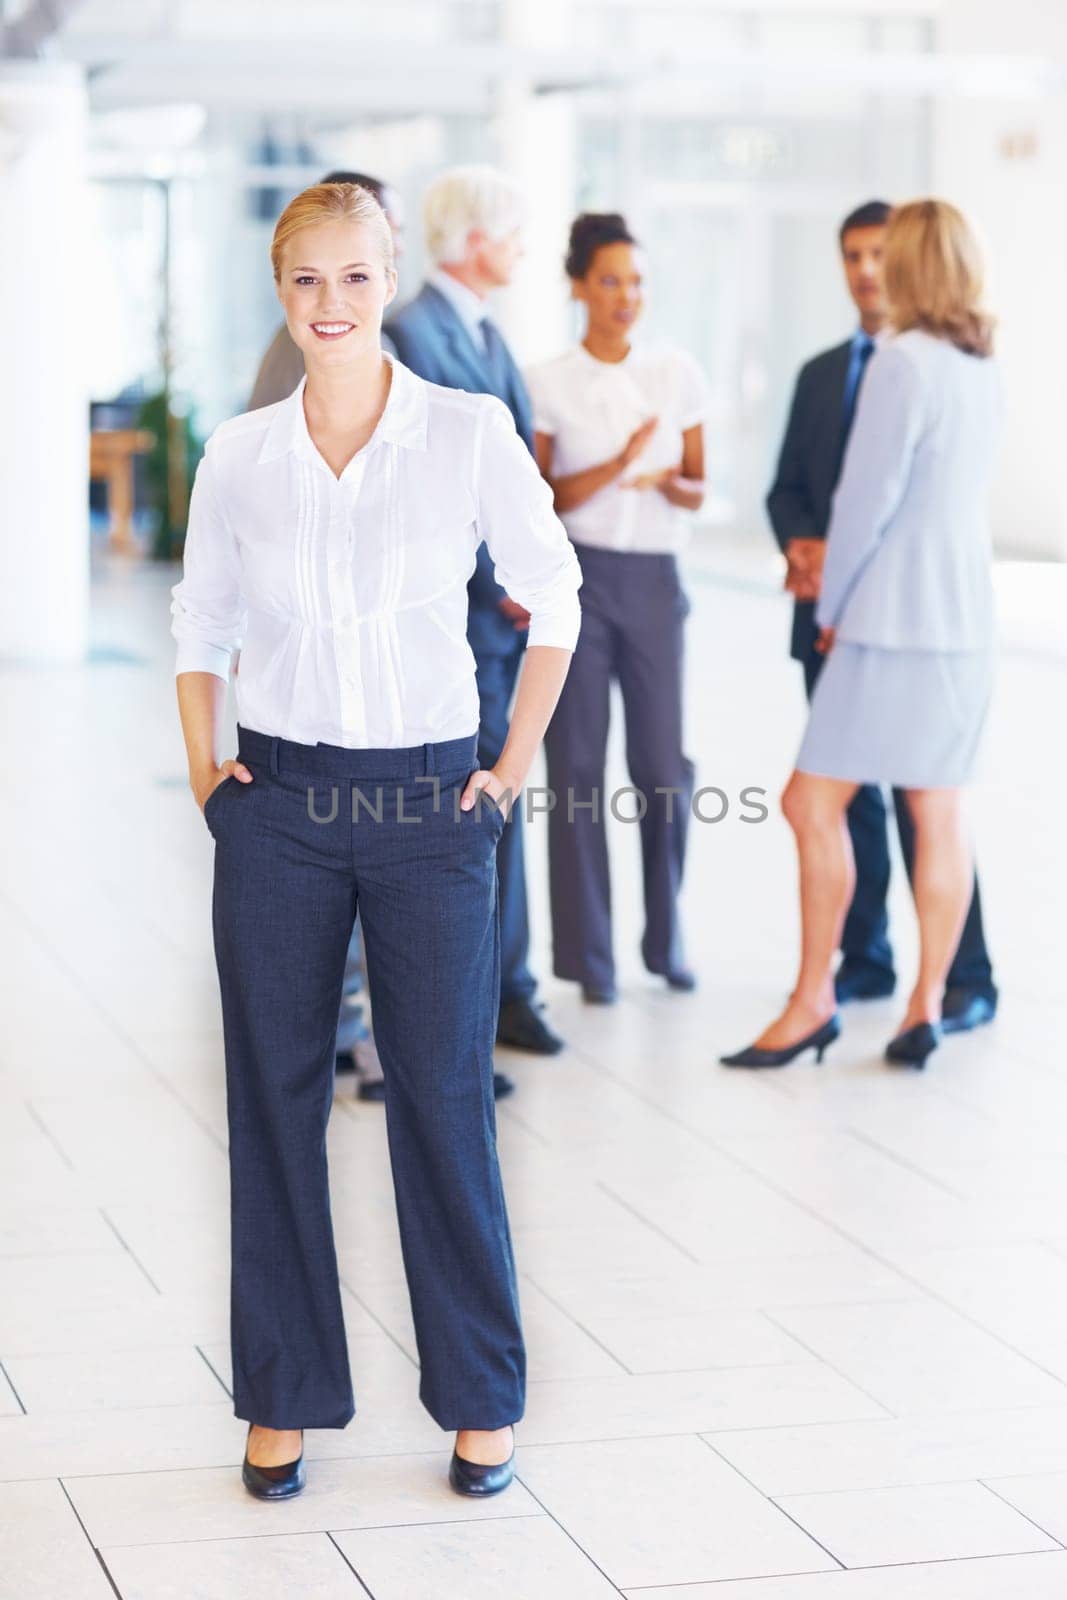 Smiling young executive with business people. Full length of young female executive standing with business people discussing in background. by YuriArcurs